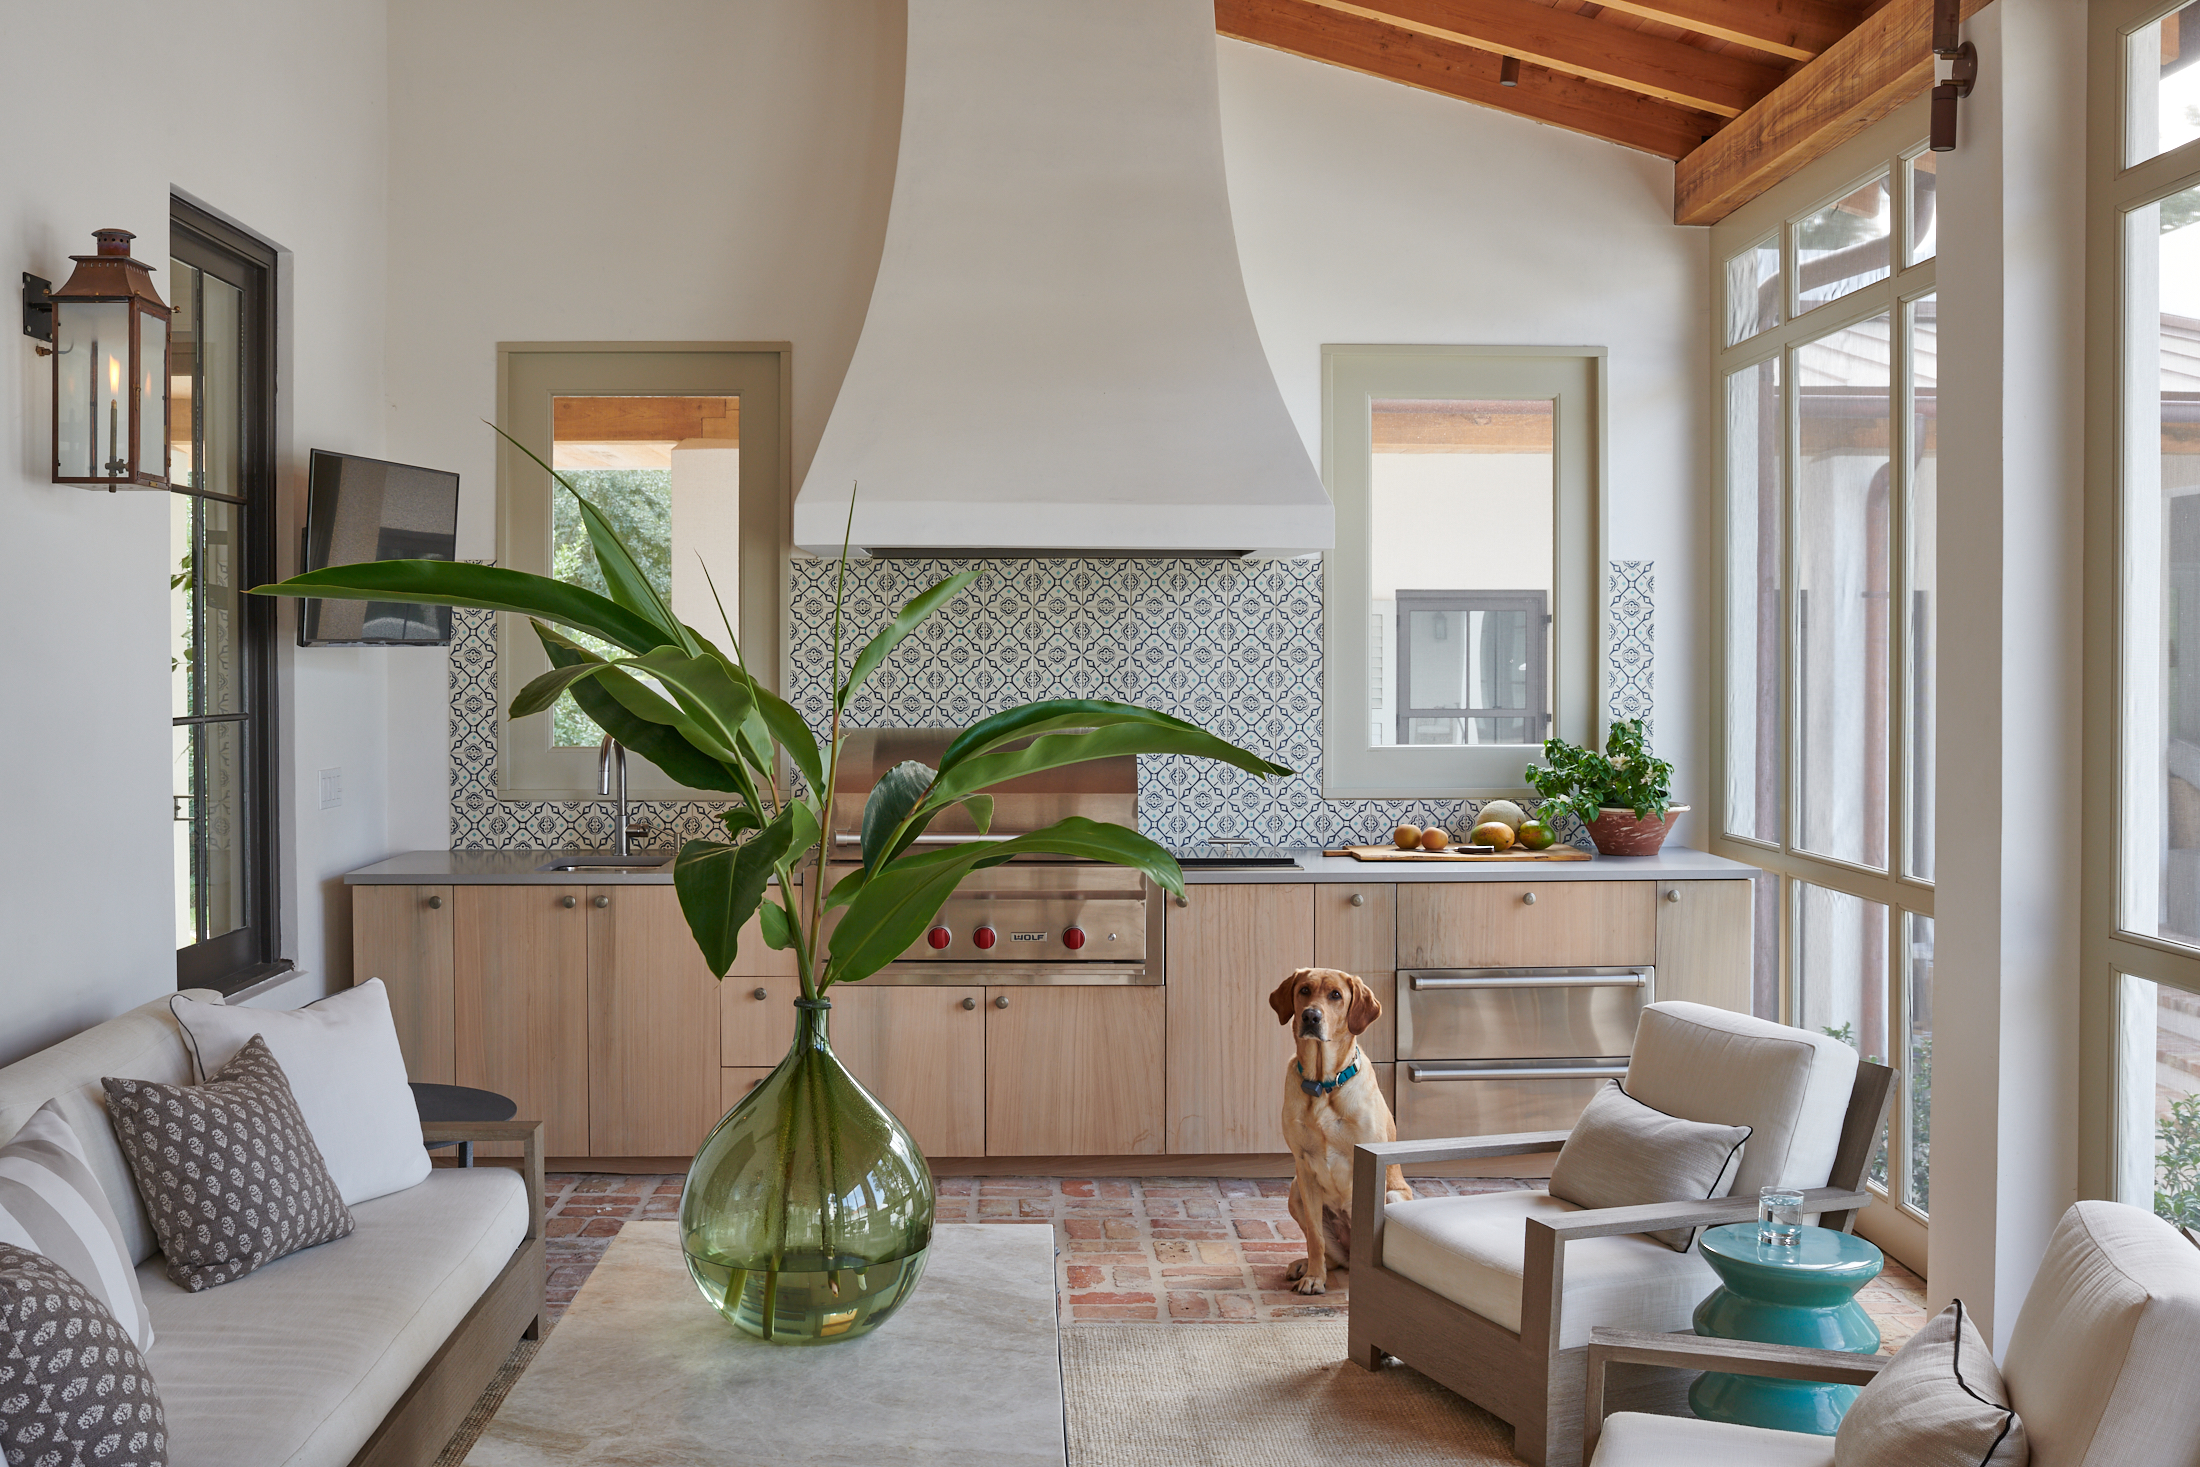 Screened in porch with grill top and dog by Alison Gootee Photography for Logan Killen Interiors 